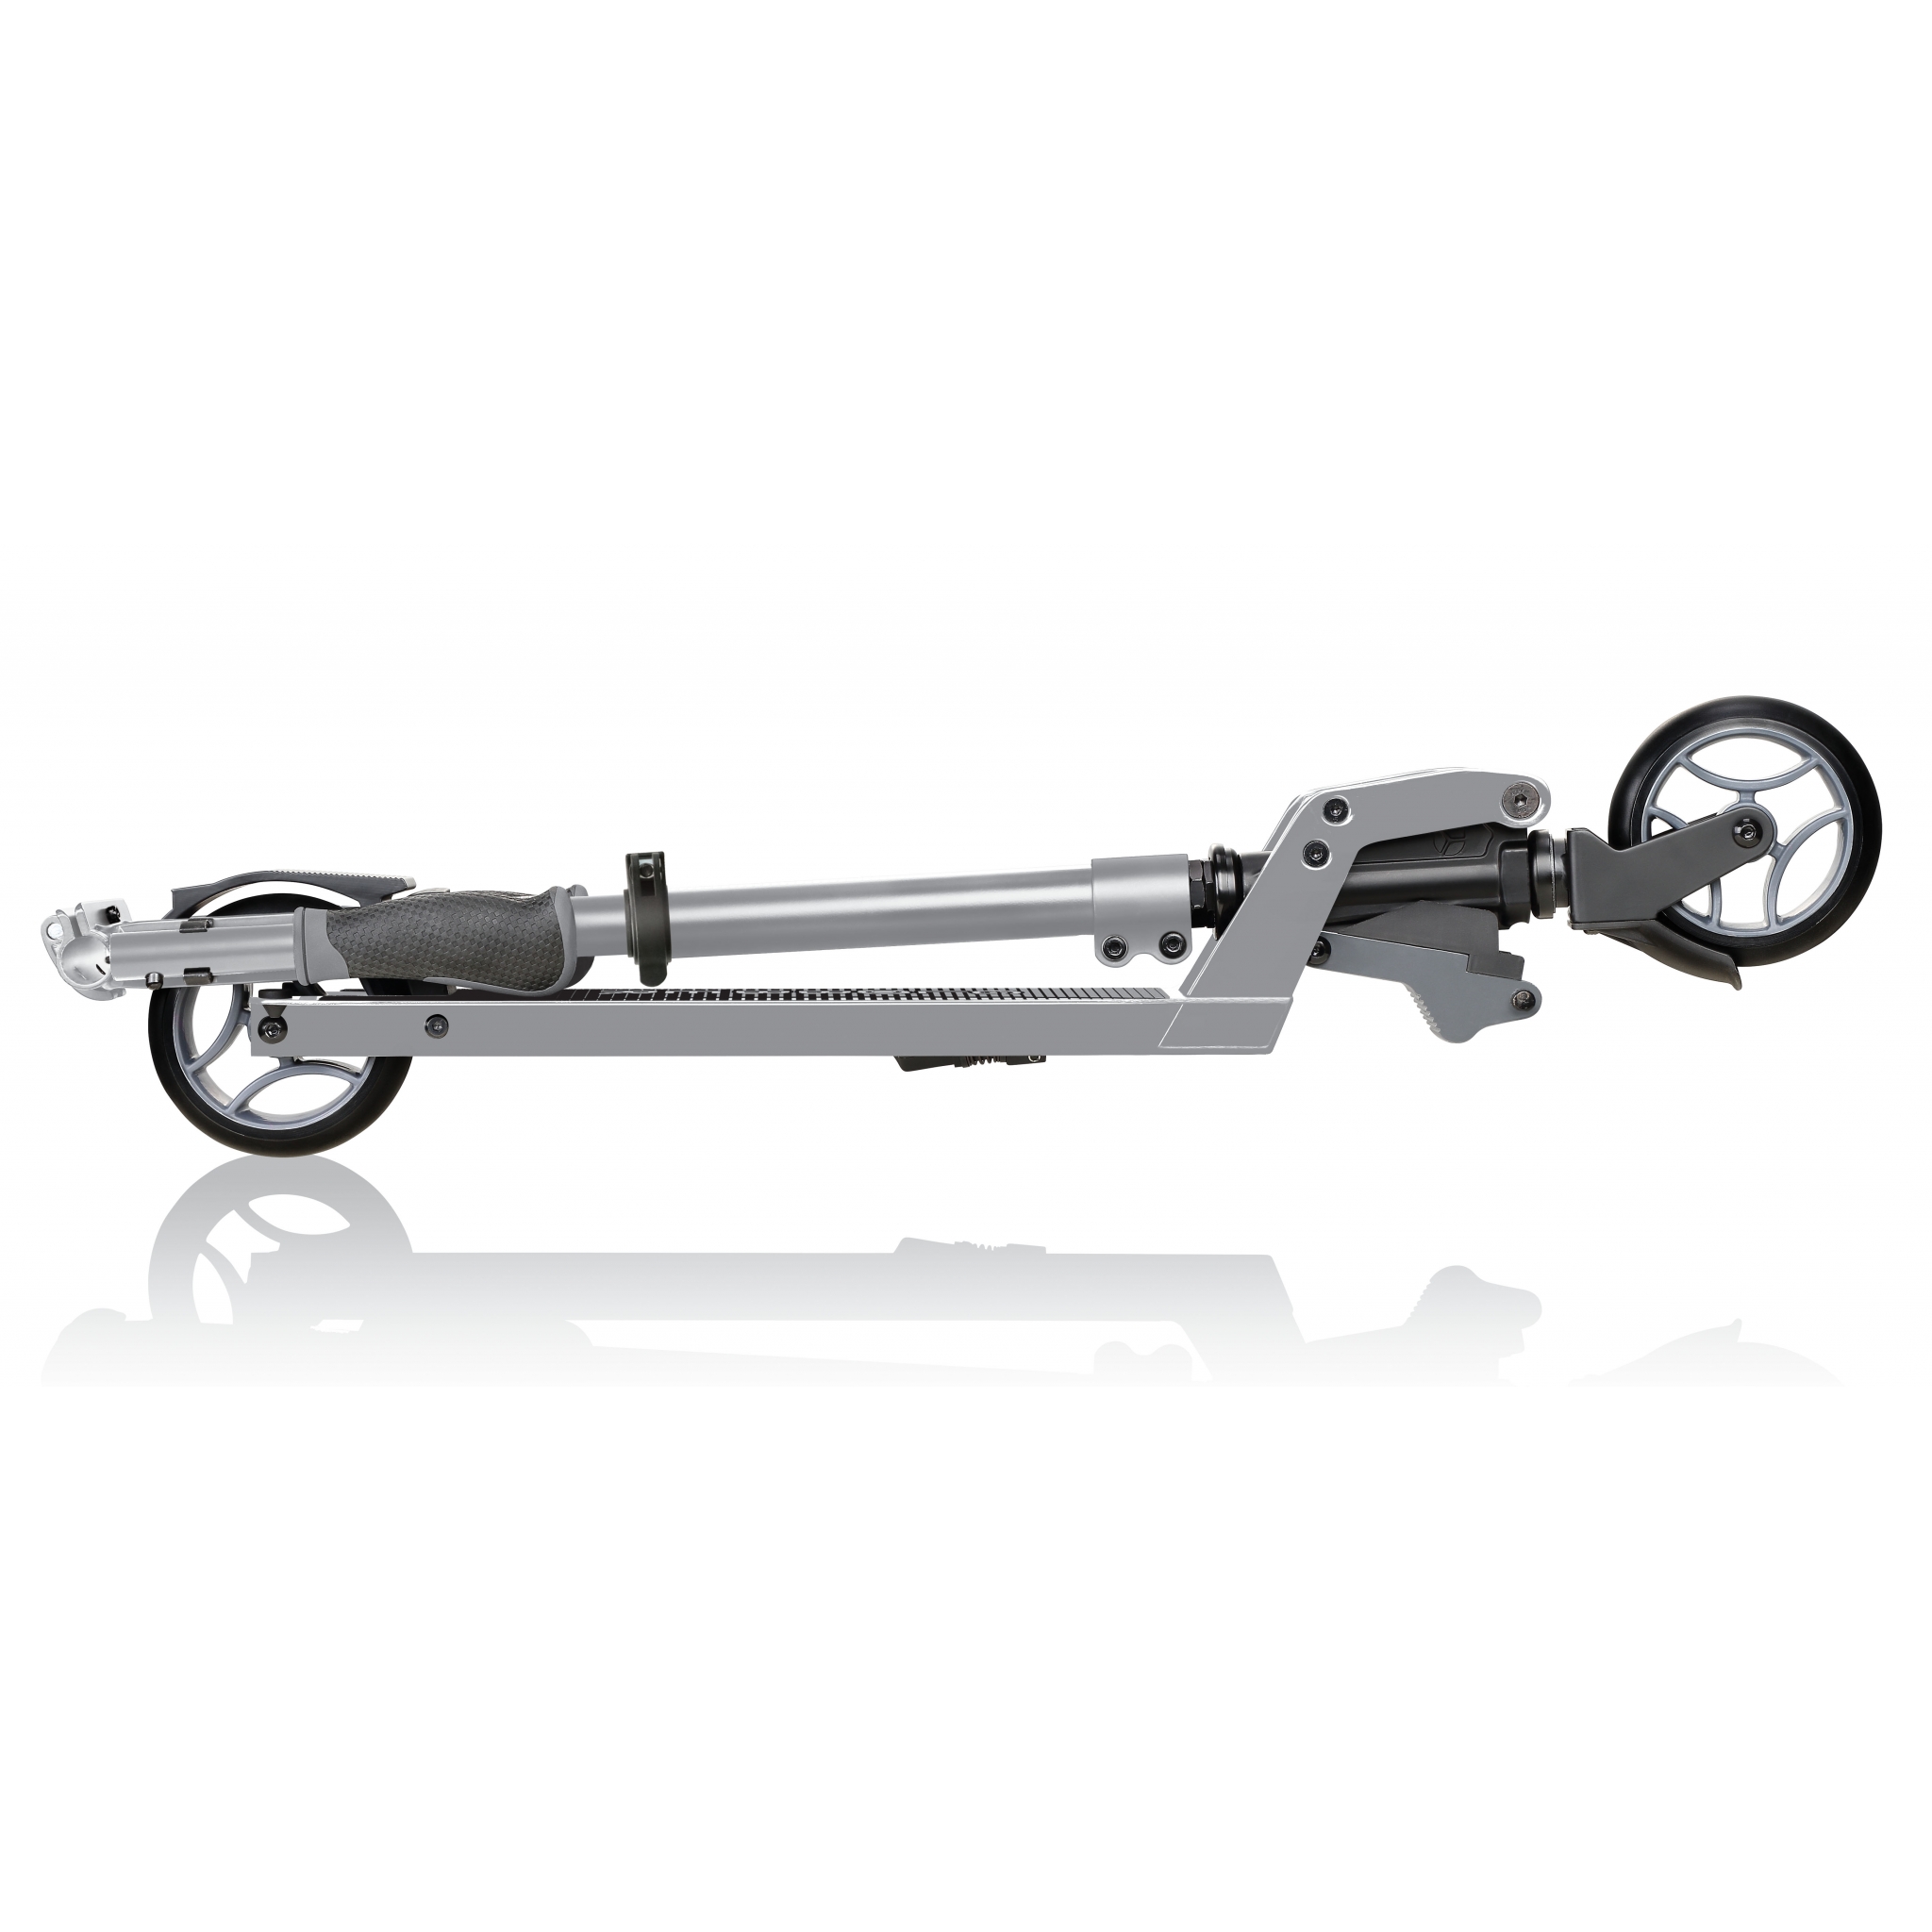 ONE-K-125-2-wheel-teen-scooter-foldable-scooter-and-handlebars_silver 3